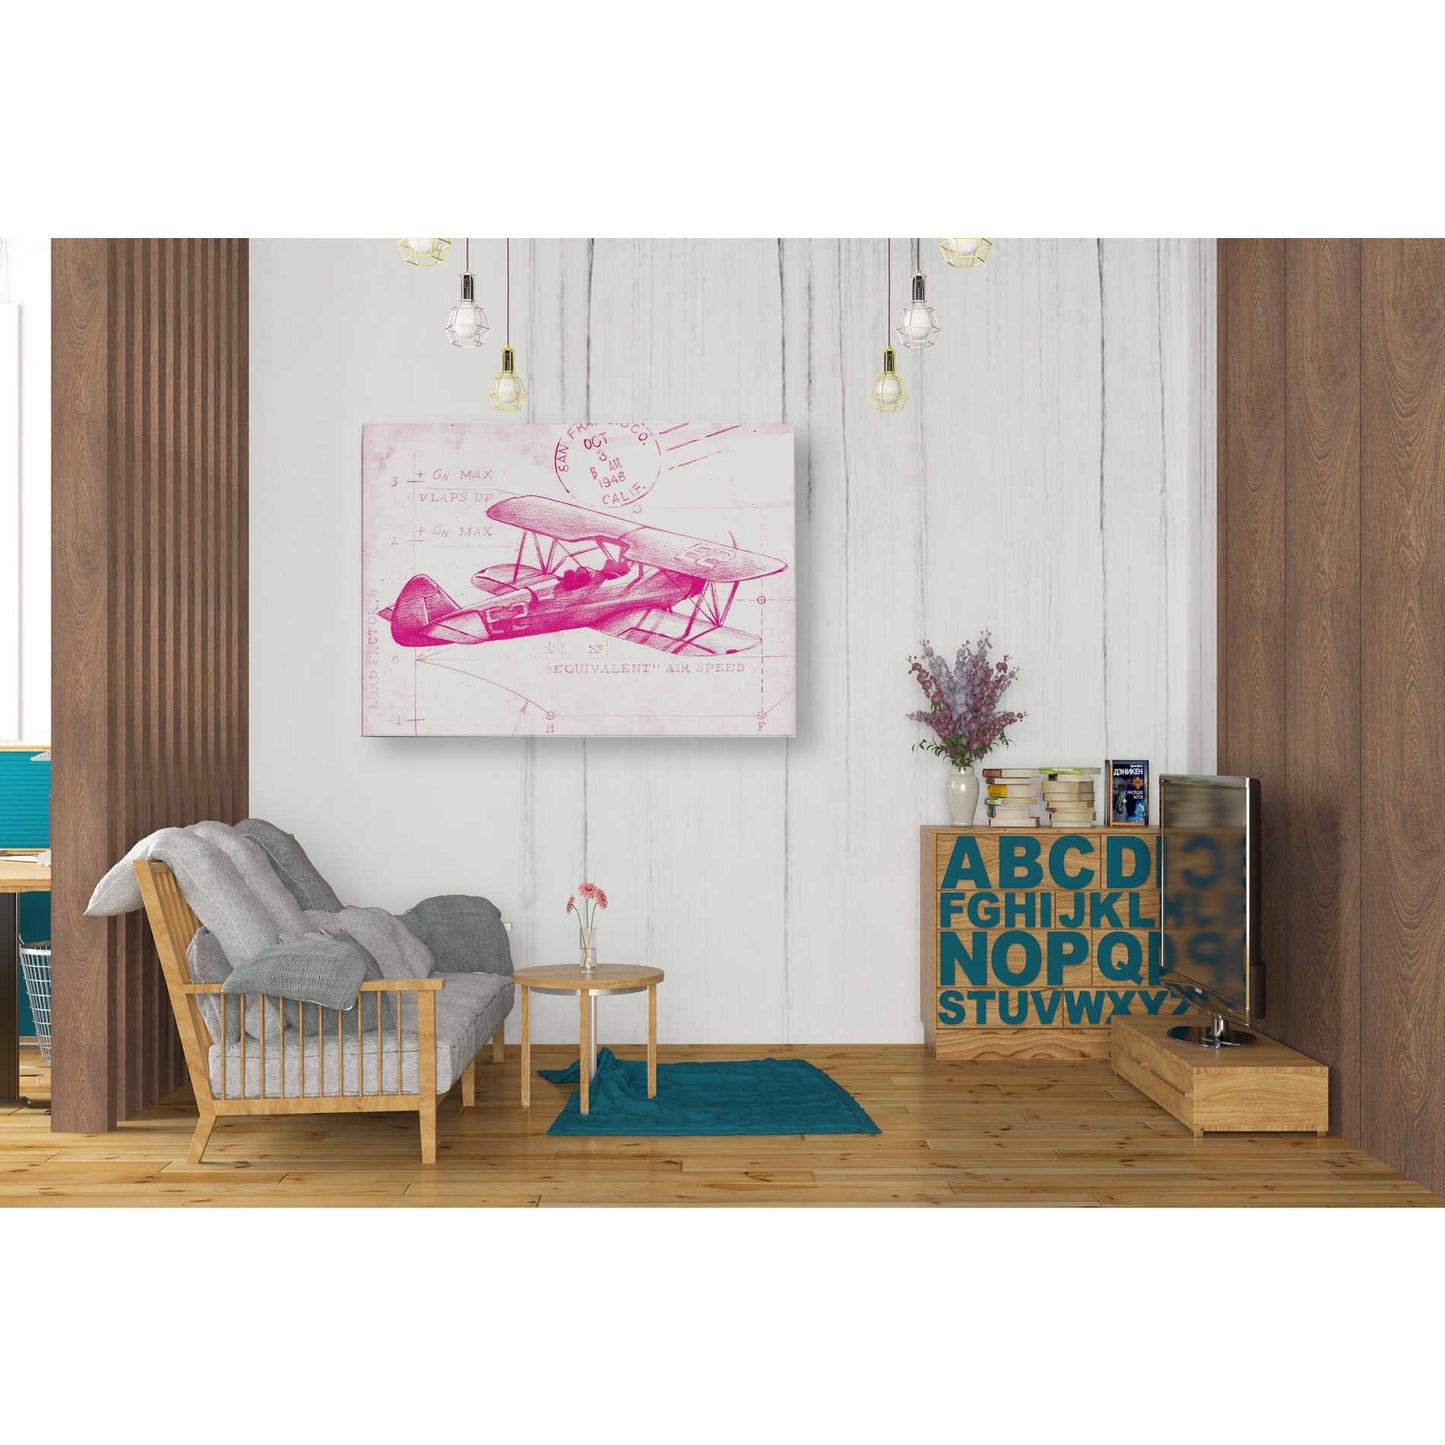 Epic Art 'Flight Schematic I in Pink' by Ethan Harper Acrylic Glass Wall Art,24x36